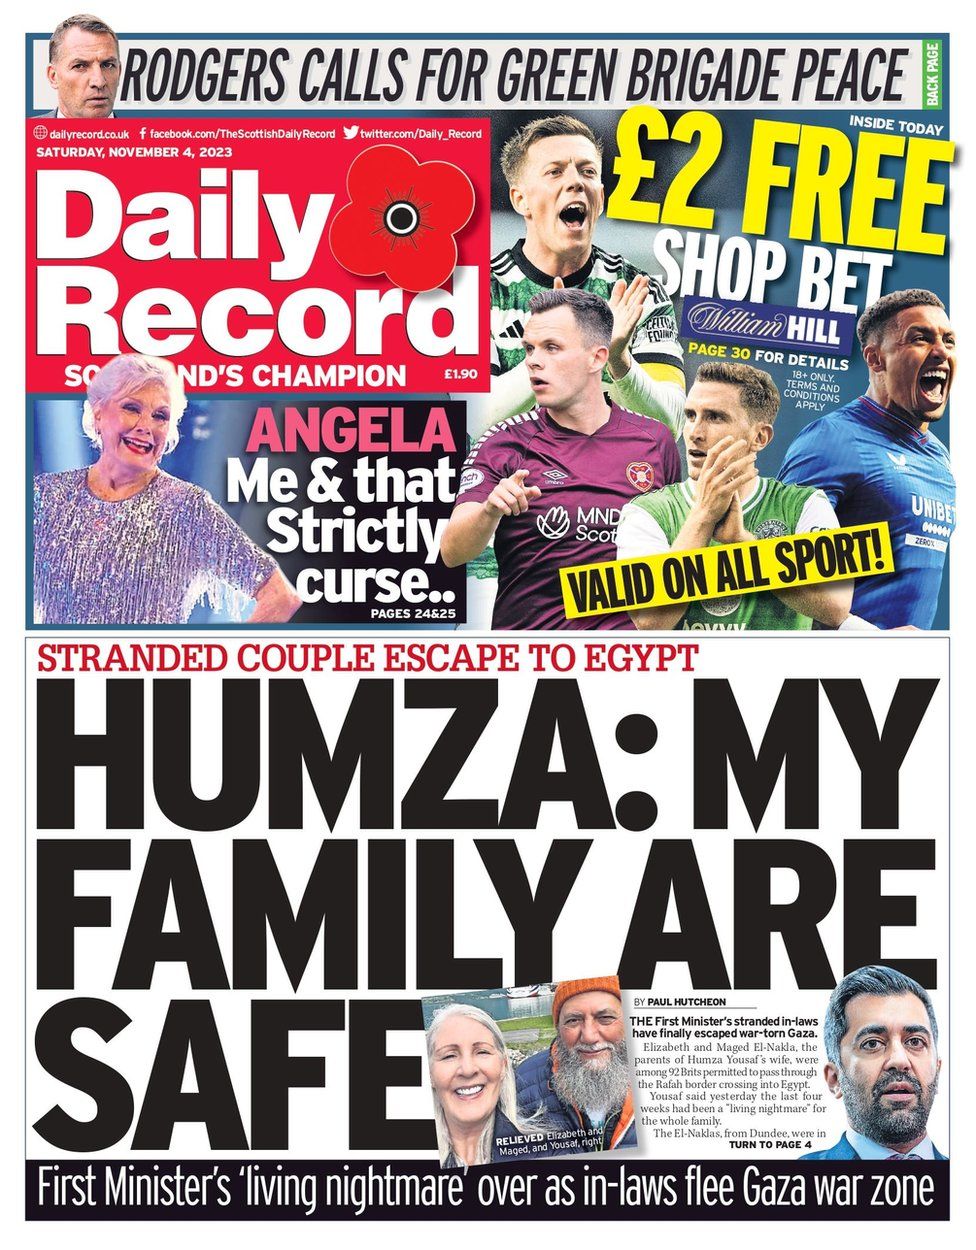 Scotland's Papers: FM's family safe and football match 'child sex ...